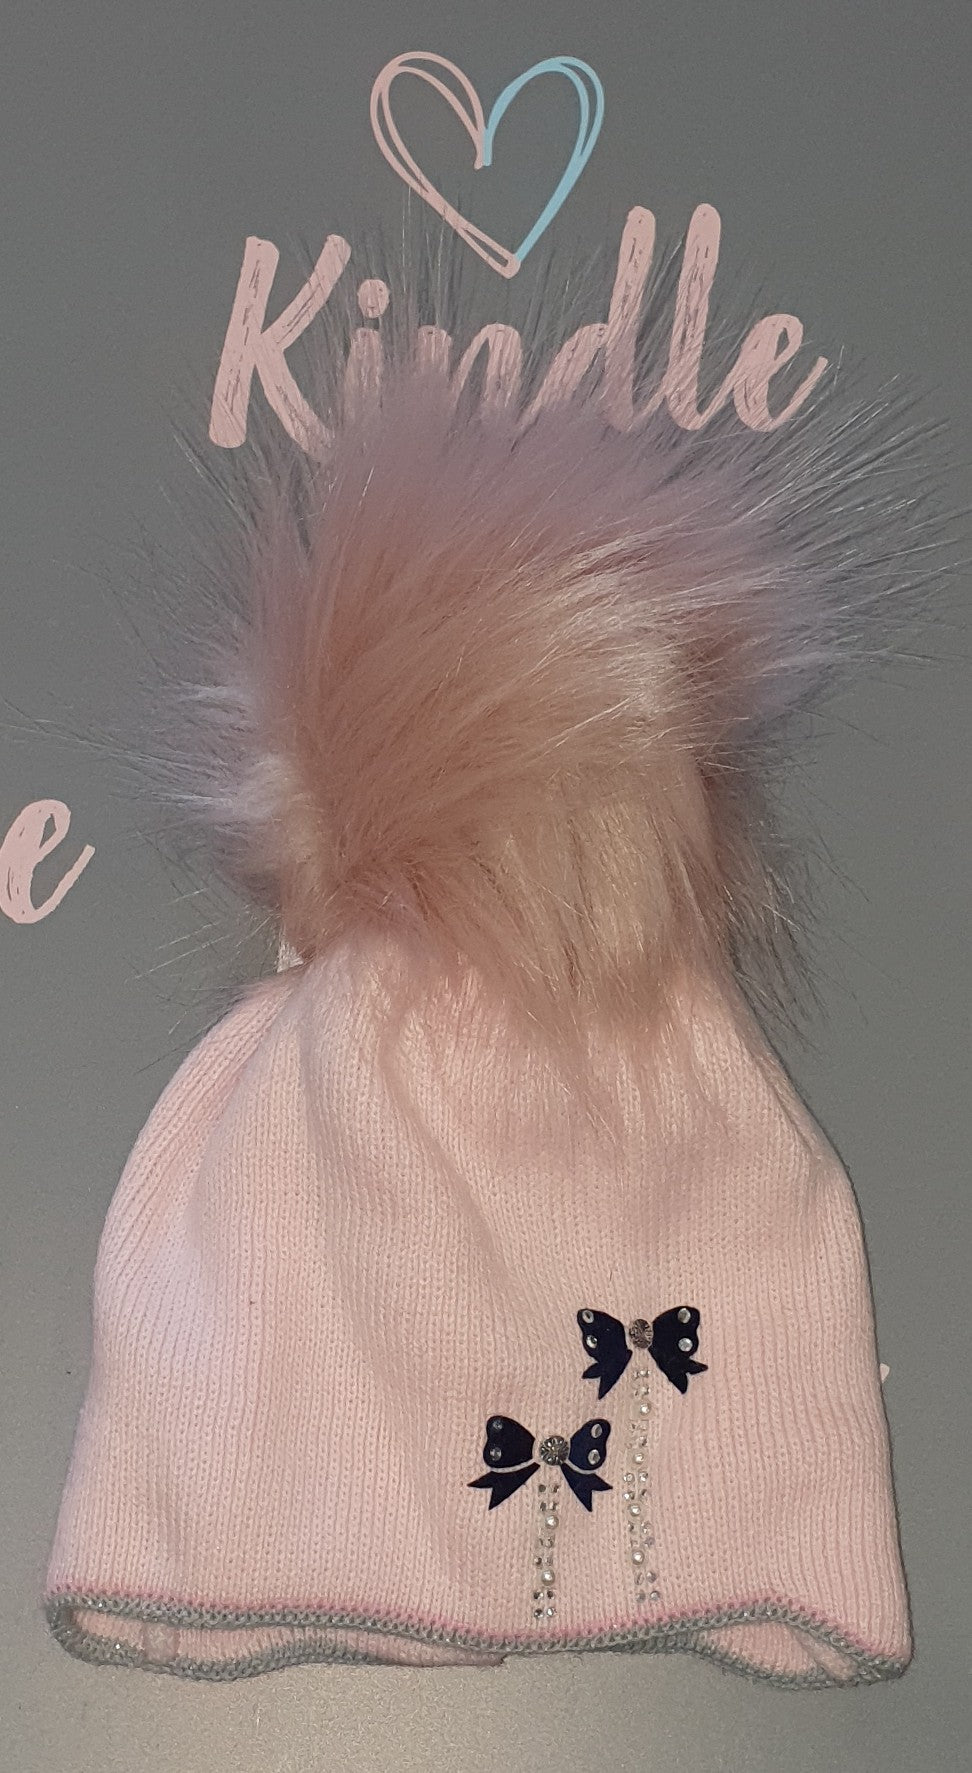 SALE Baby Girls Pale Pink Pom Pom Hat With Navy Bows